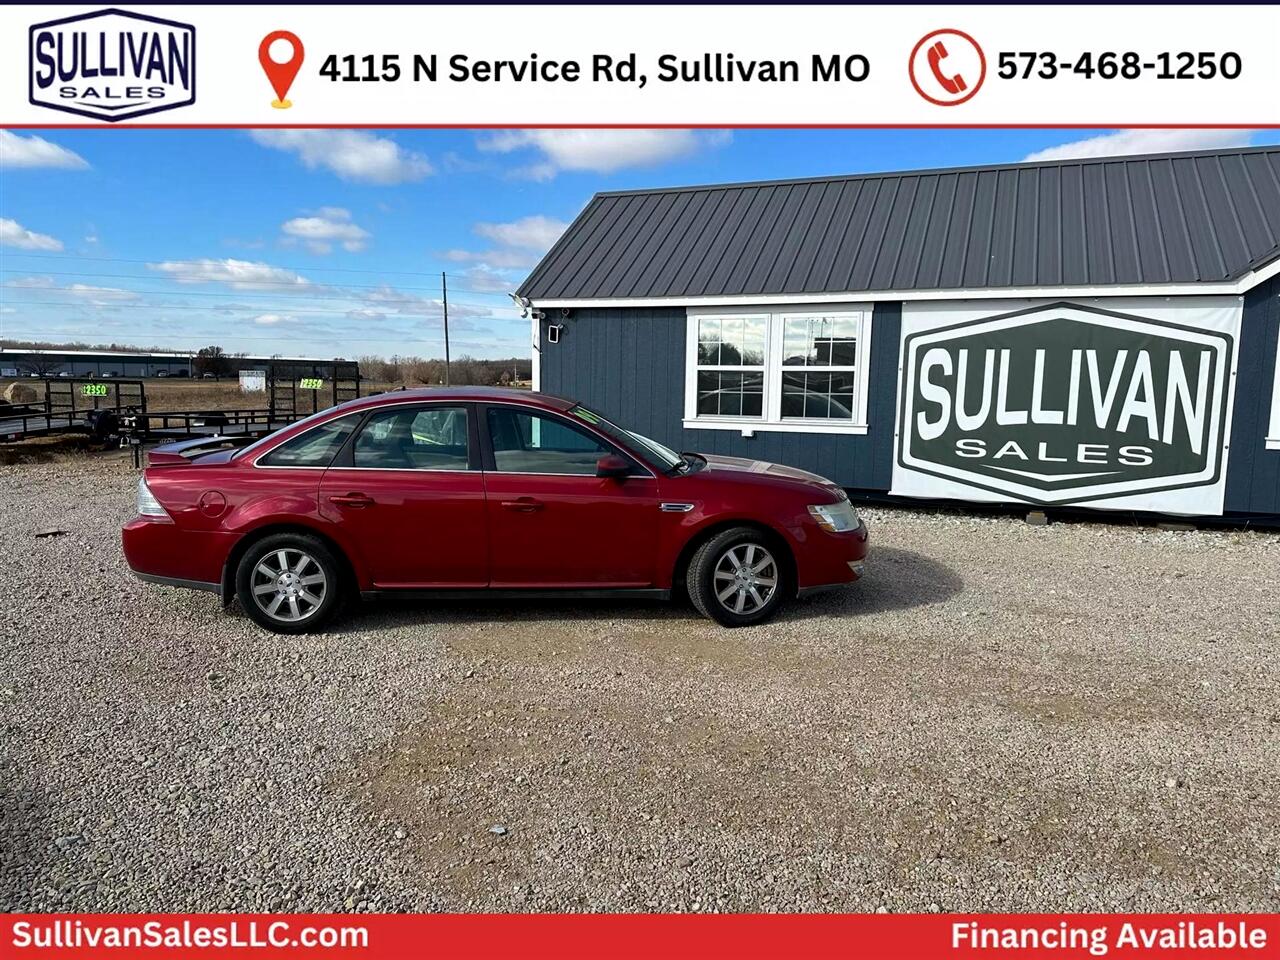 Used 2009 Ford Taurus SEL with VIN 1FAHP24W09G101574 for sale in Sullivan, MO